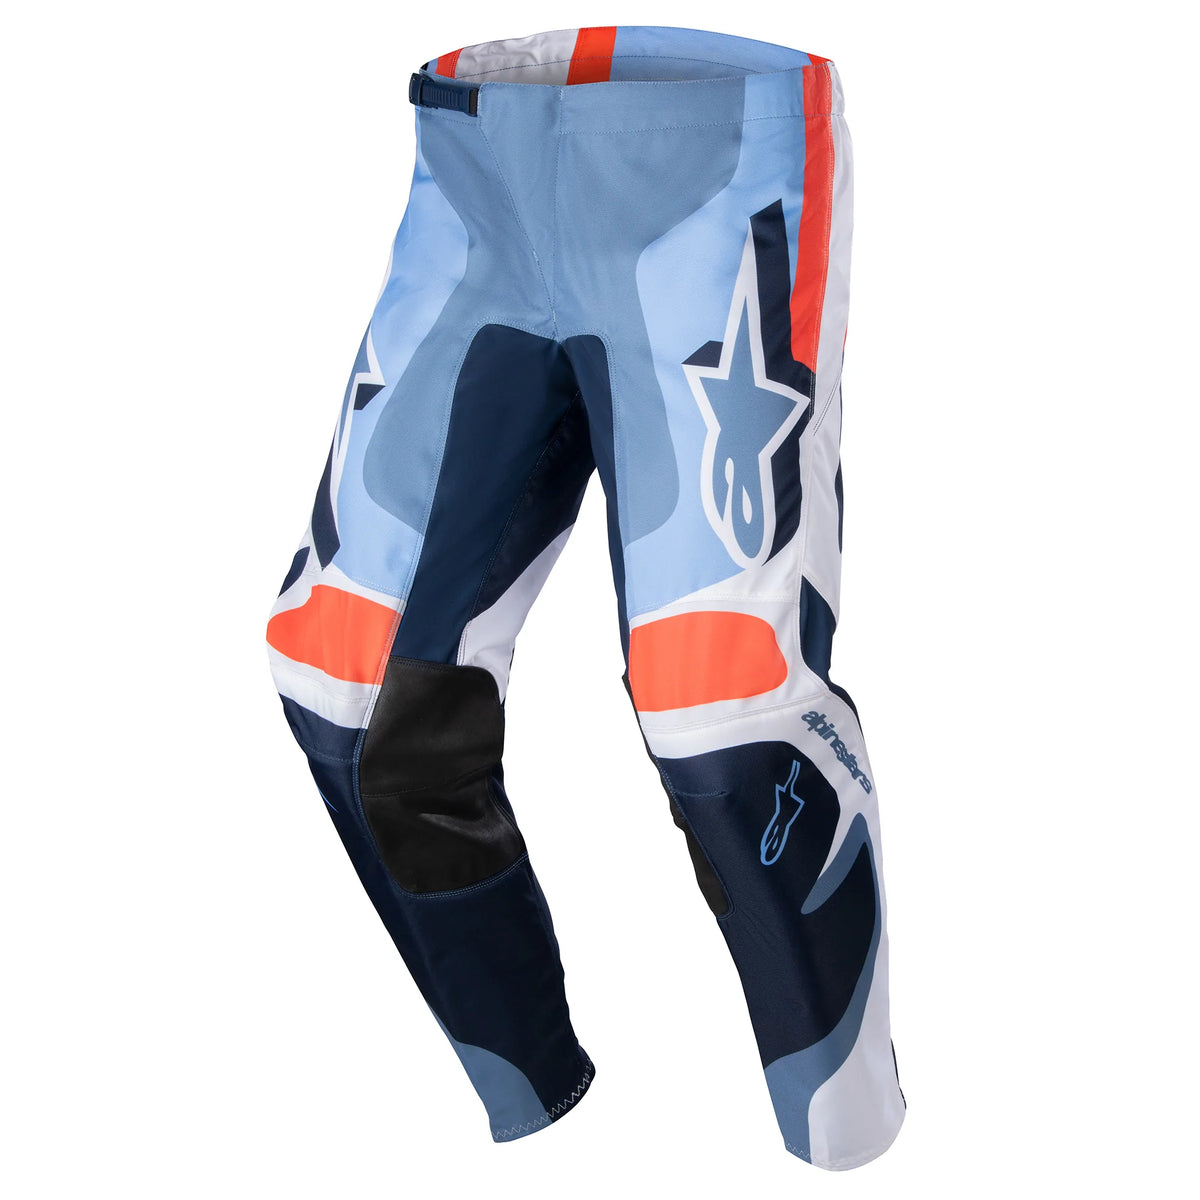 Capobranco Shop - Product: 3324517 - ALPINESTARS RAMJET AIR MEN'S  MOTORCYCLE TROUSERS - Alpinestars (Clothing and accessories-Men's trousers  - Technical trousers);